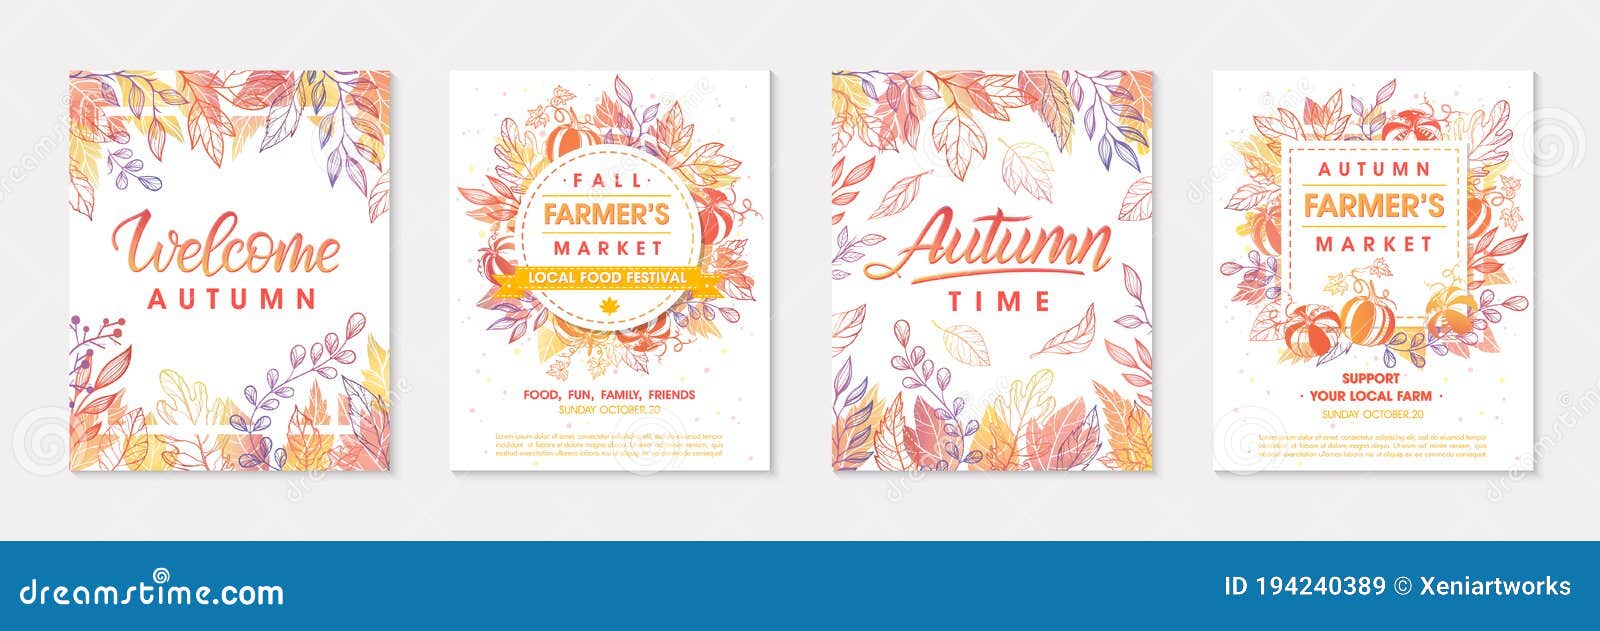 autumn seasonals postes with leaves and floral s in fall colors